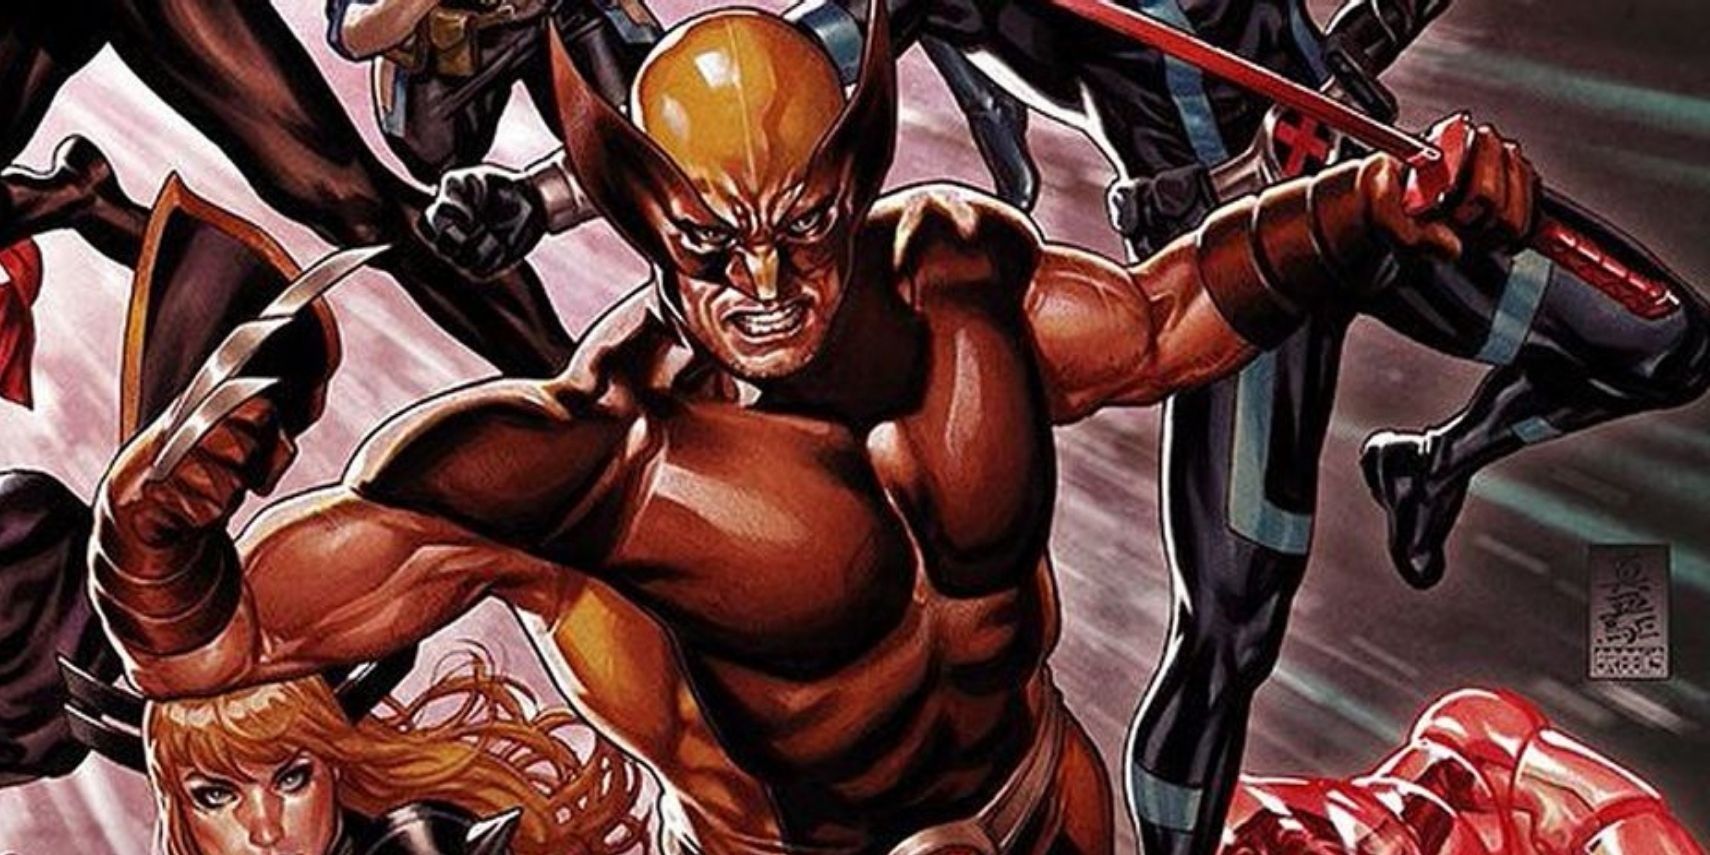 Marvel comics' Wolverine with the Muramasa sword and his claws extended with the X-Men behind him